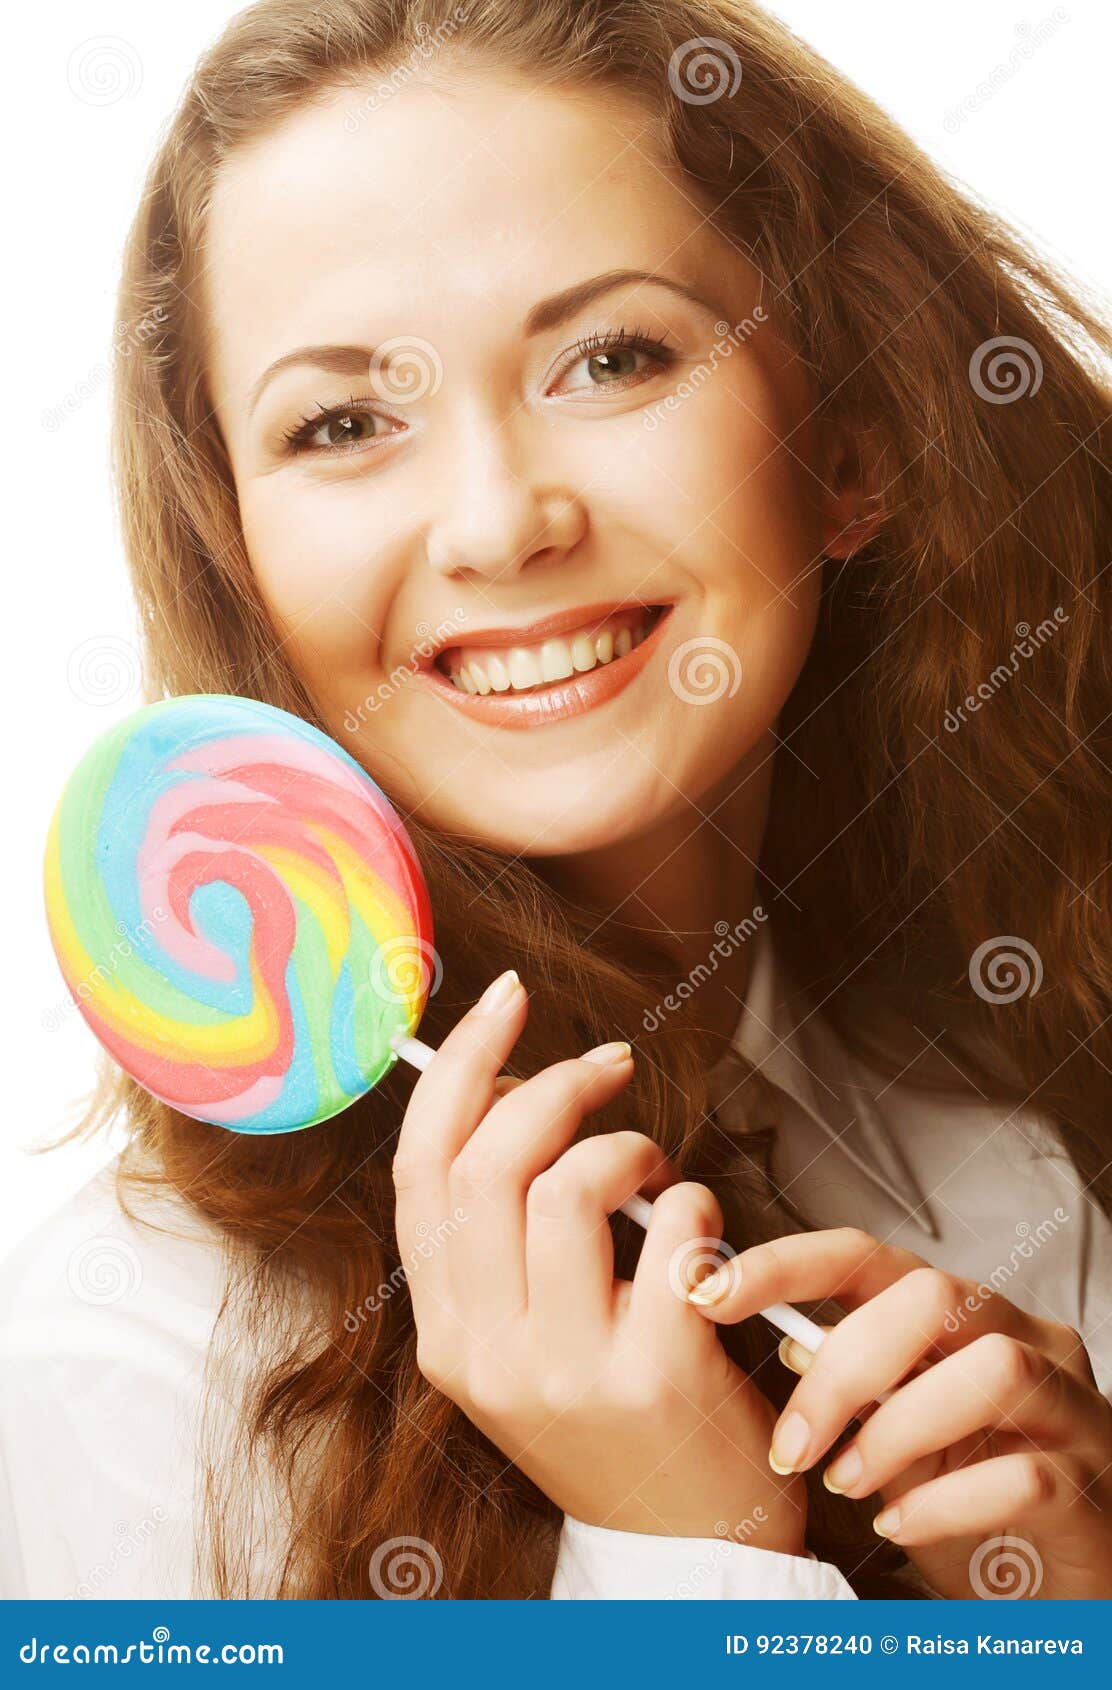 Eating Lollipop Clipart Hd PNG, Children S Day Cute Girl Eating ...